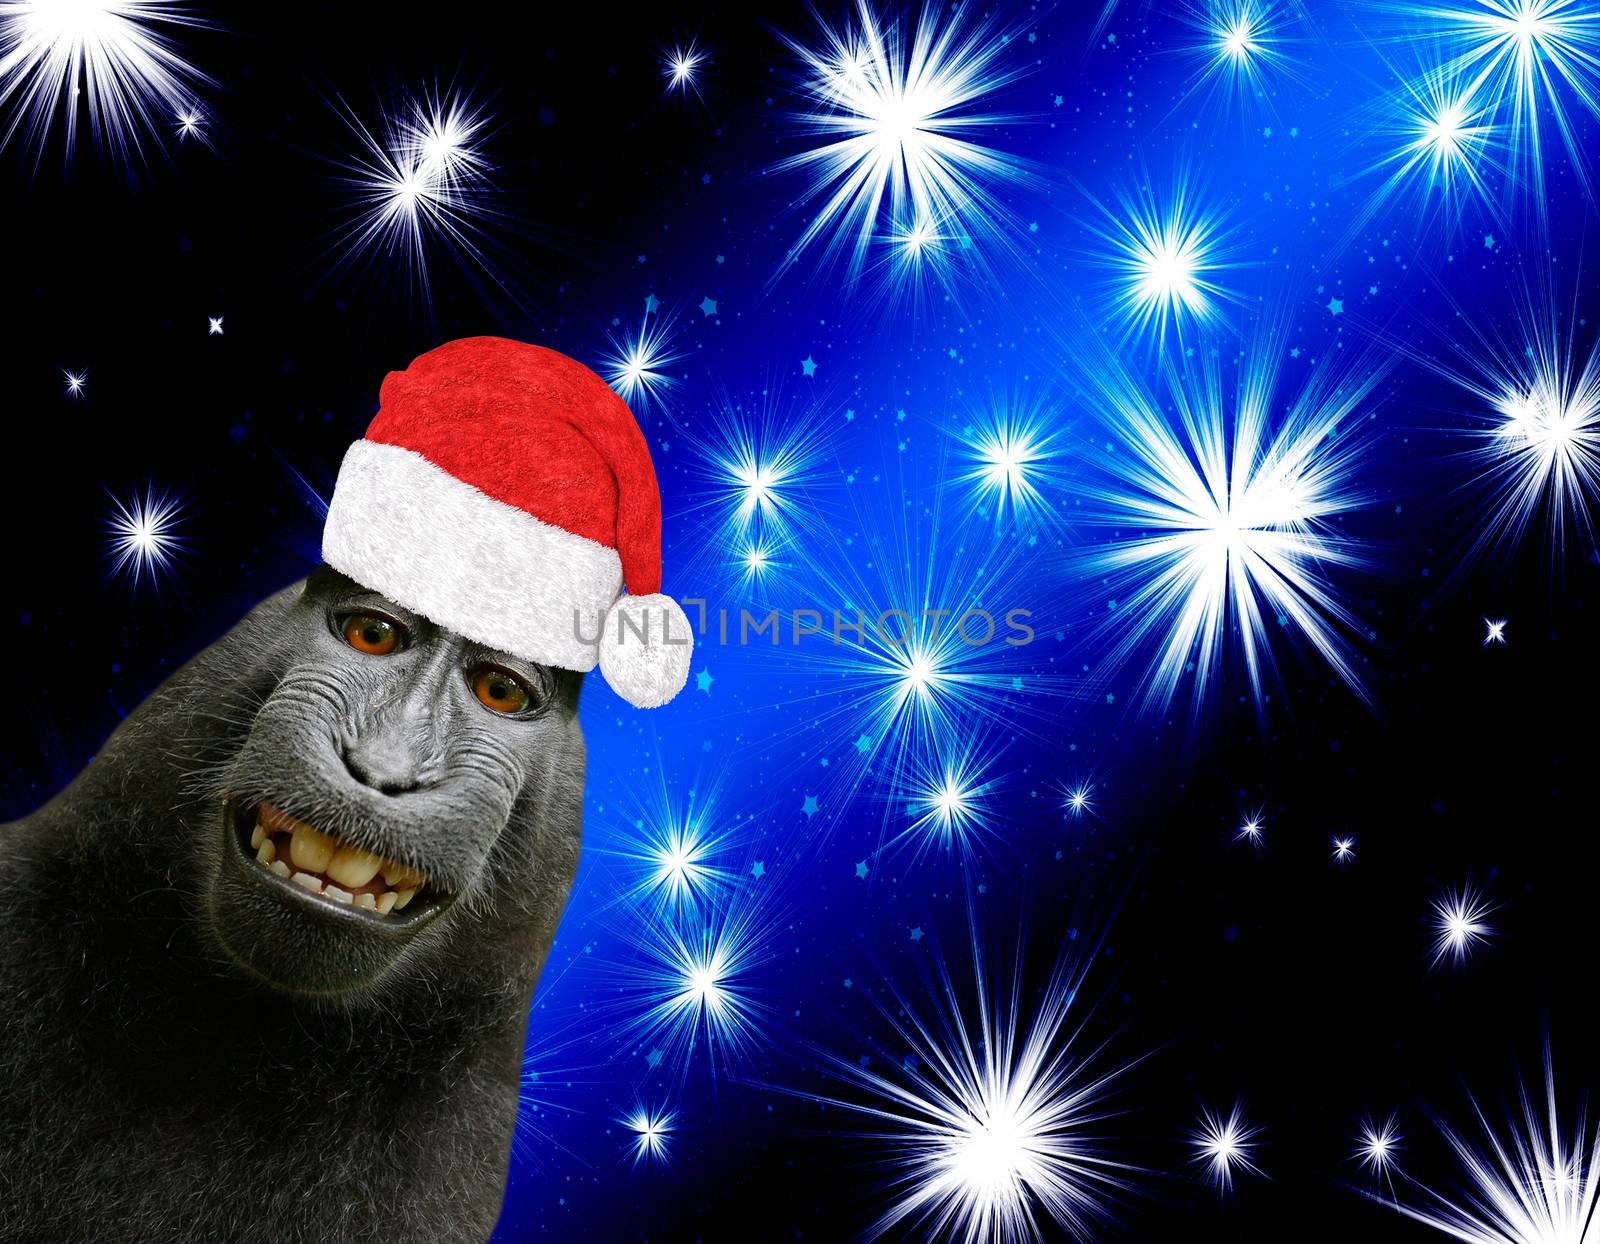 Merry christmas card a funny chimpanzee monkey wearing a santa claus bonnet isolated on a black and blue background with shining bright stars